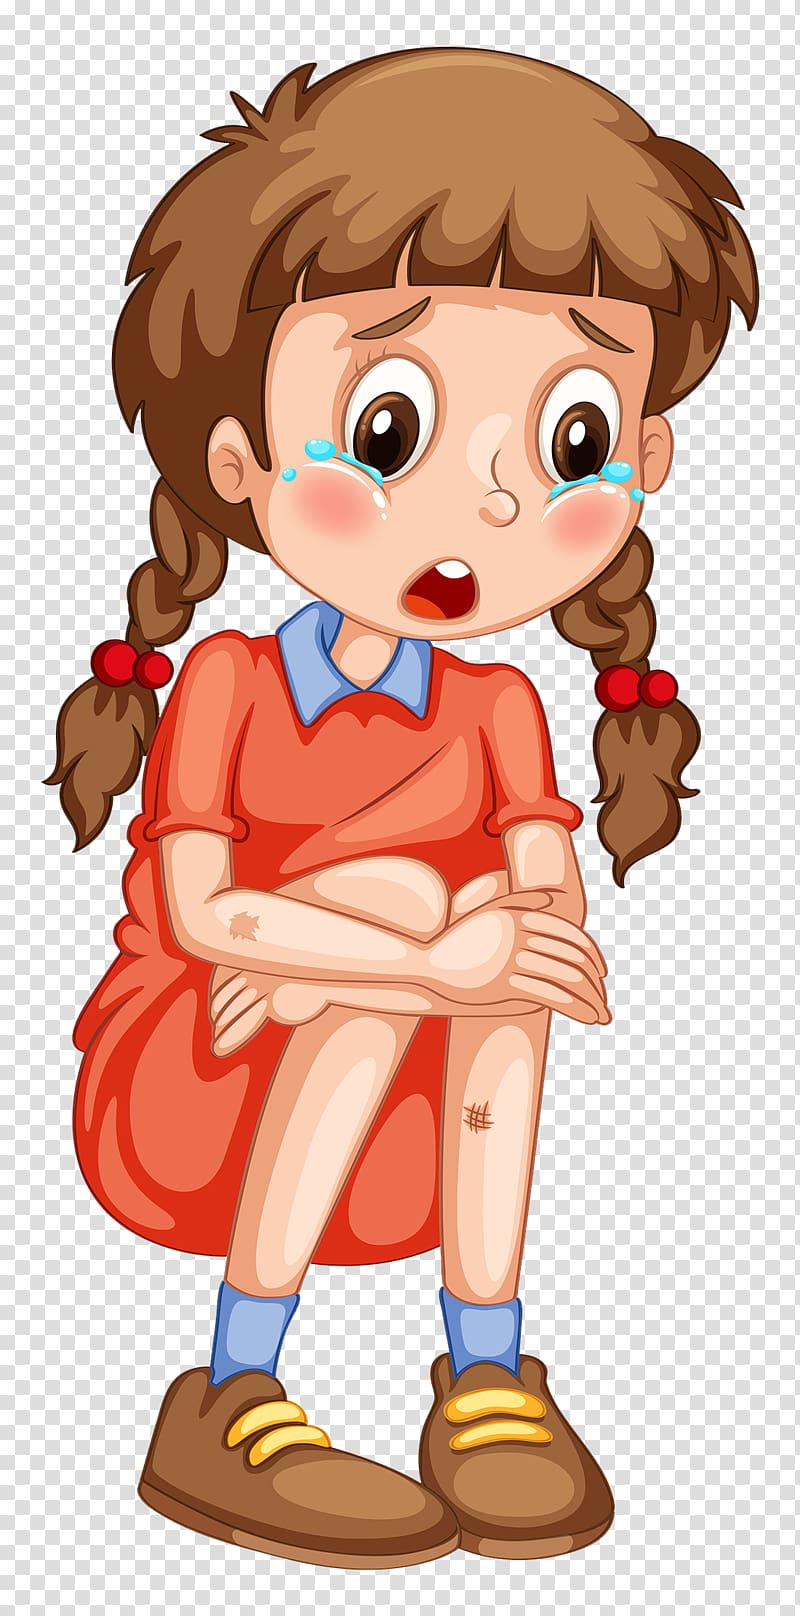 woman crying illustration, Cartoon Illustration, The child is crying transparent background PNG clipart